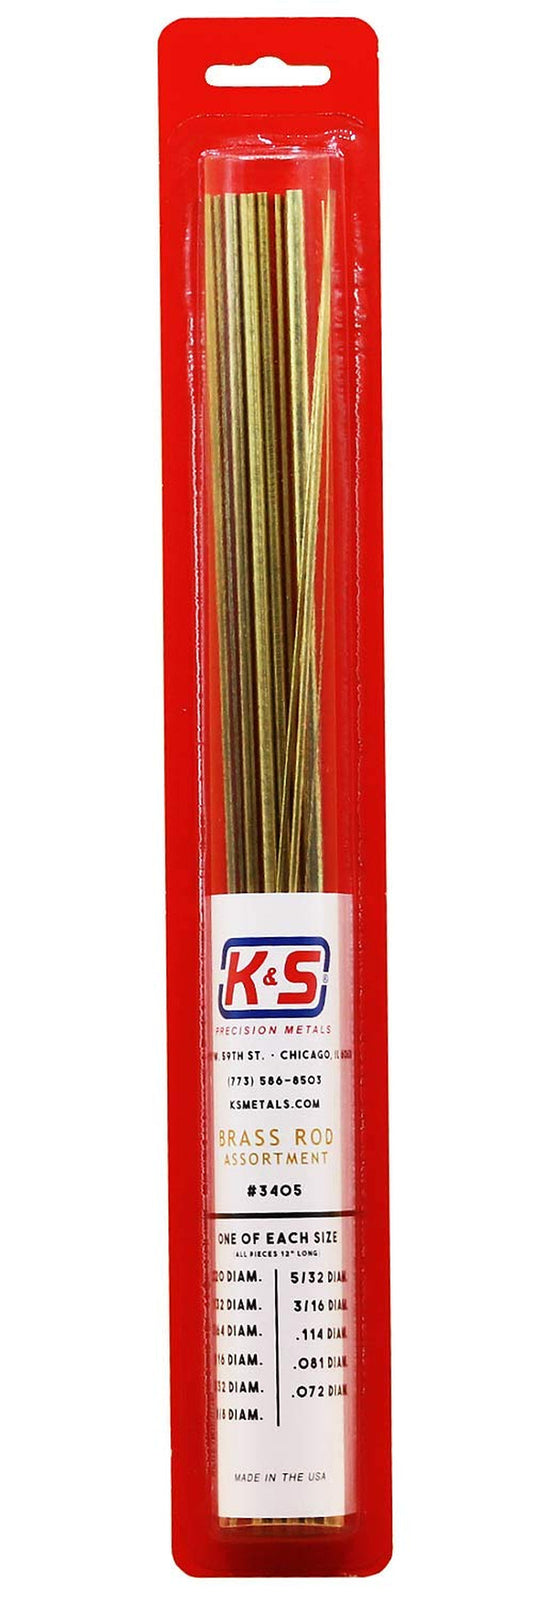 K&S 3405 round Brass Rod Assortment, 11 Pieces, Made in the USA